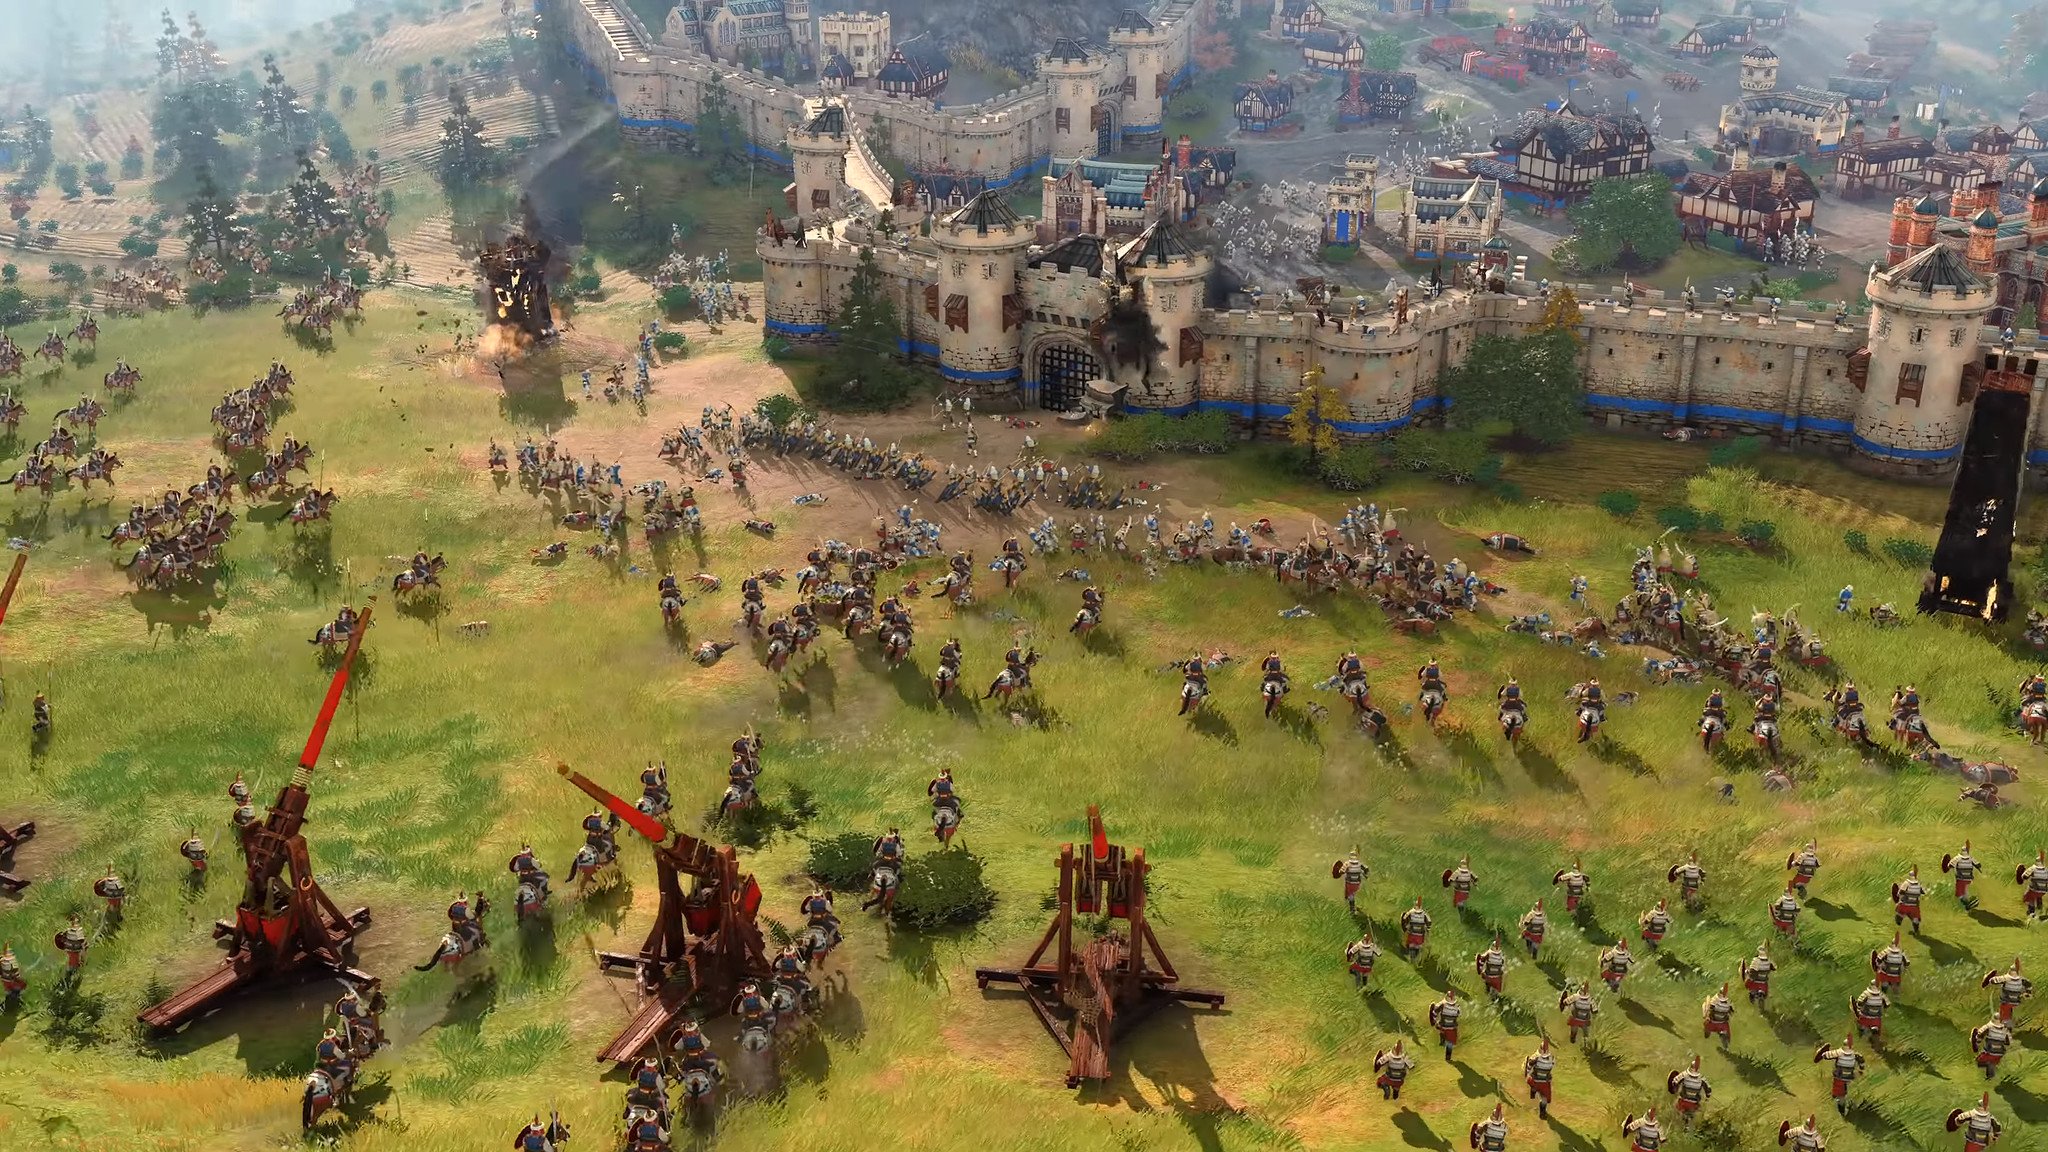 Excited for Age of Empires 4? Here's everything you need to know.